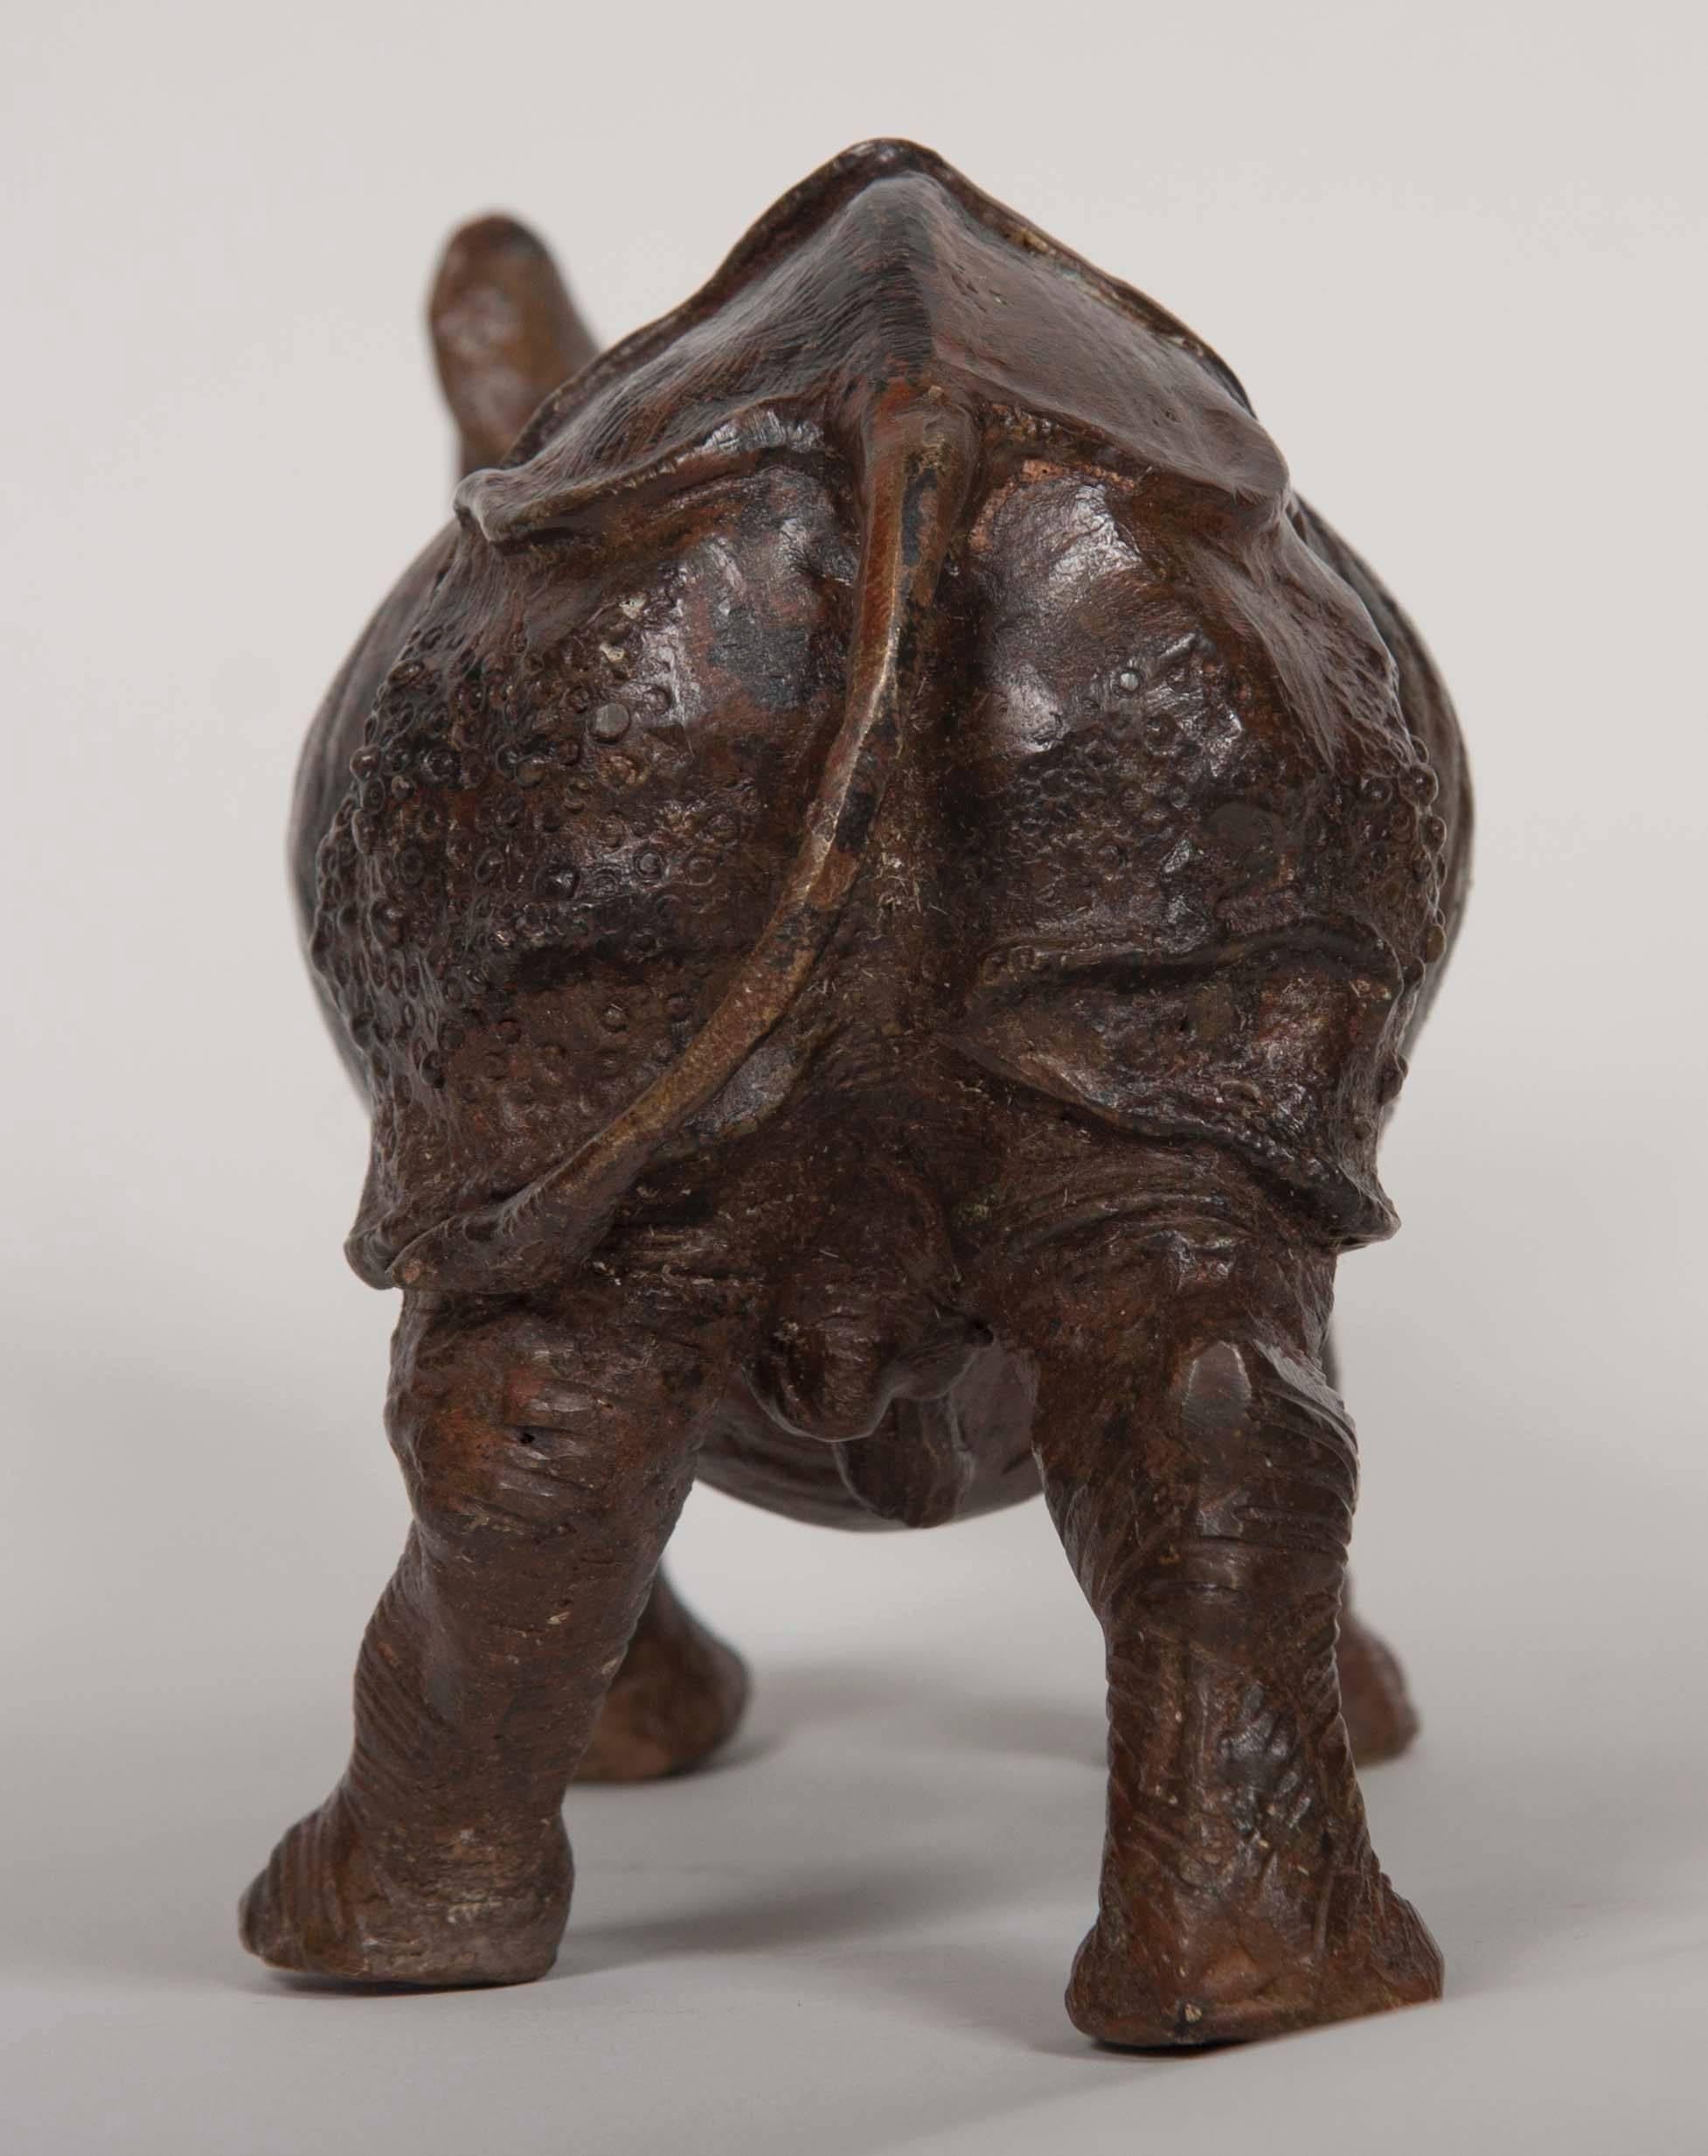 A late 19th / early 20th century Japanese bronze of a rhinoceros having wonderful patination.